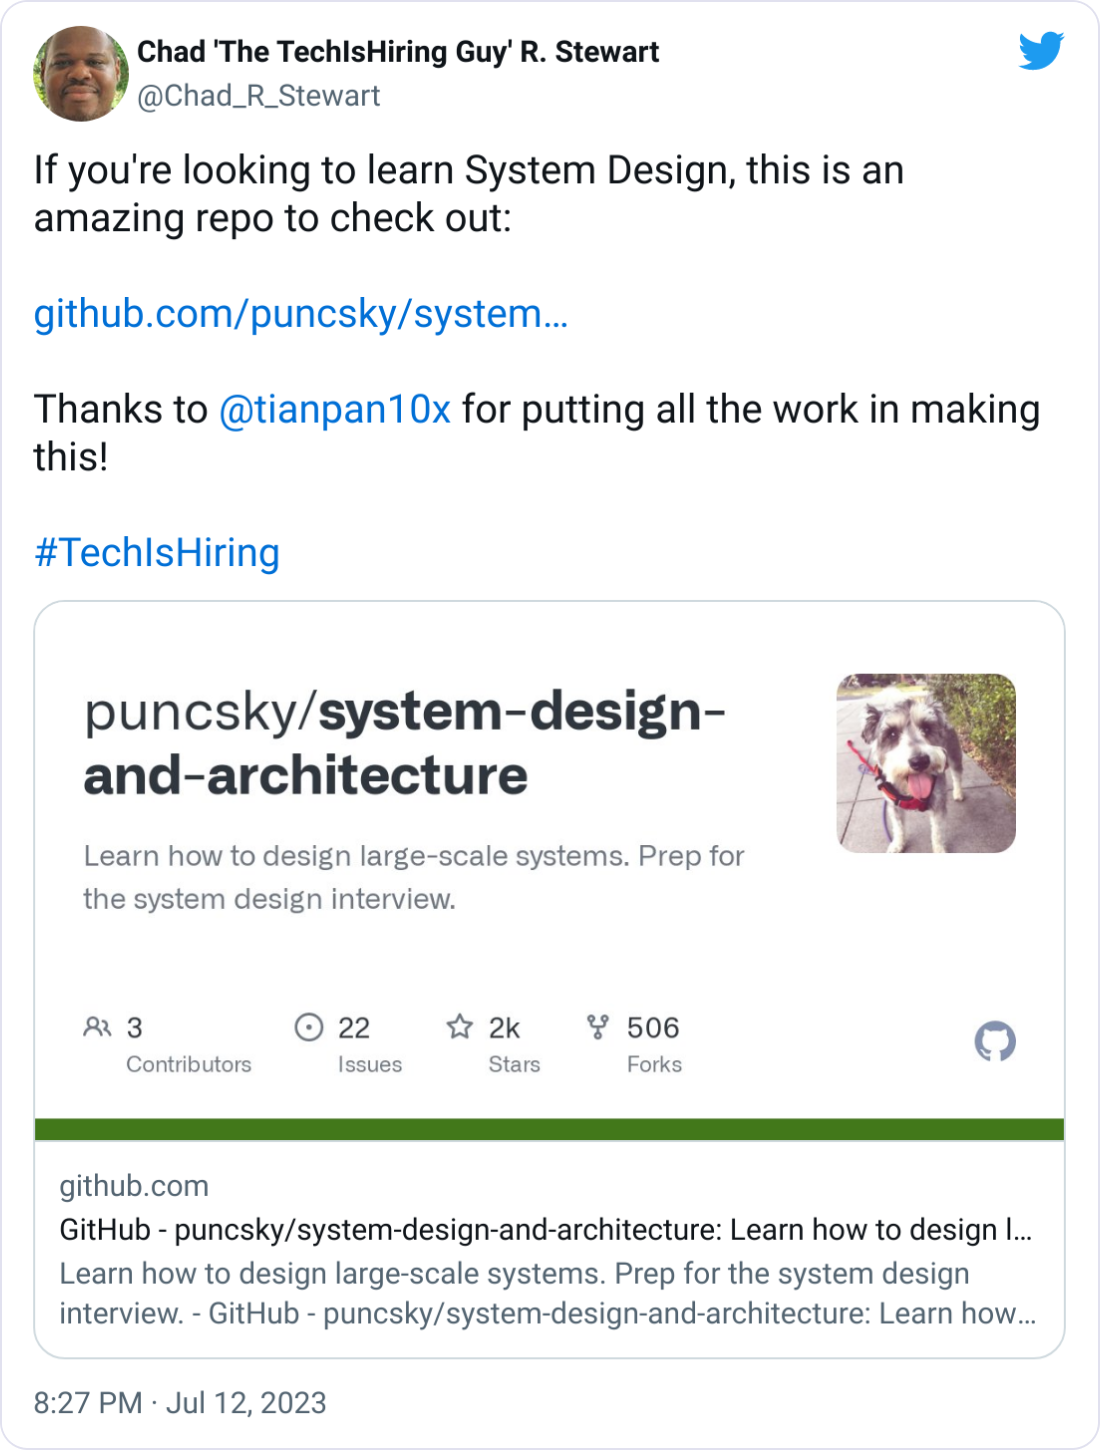 Chad 'The TechIsHiring Guy' R. Stewart @Chad_R_Stewart If you're looking to learn System Design, this is an amazing repo to check out:  https://github.com/puncsky/system-design-and-architecture  Thanks to  @tianpan10x  for putting all the work in making this!  #TechIsHiring